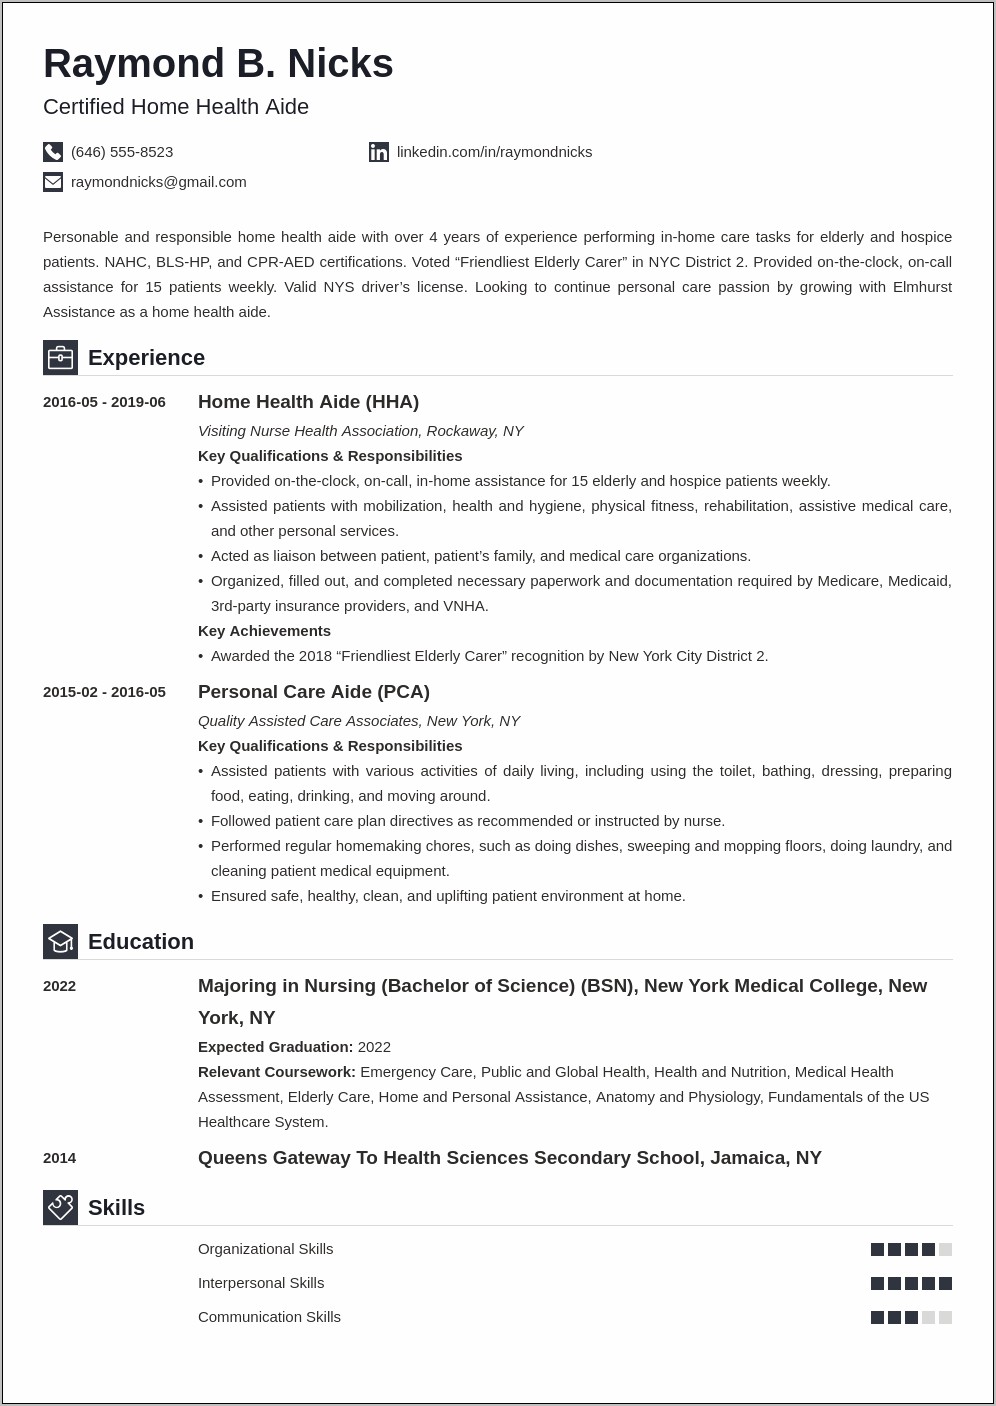 Resume Example Returing From Retirement